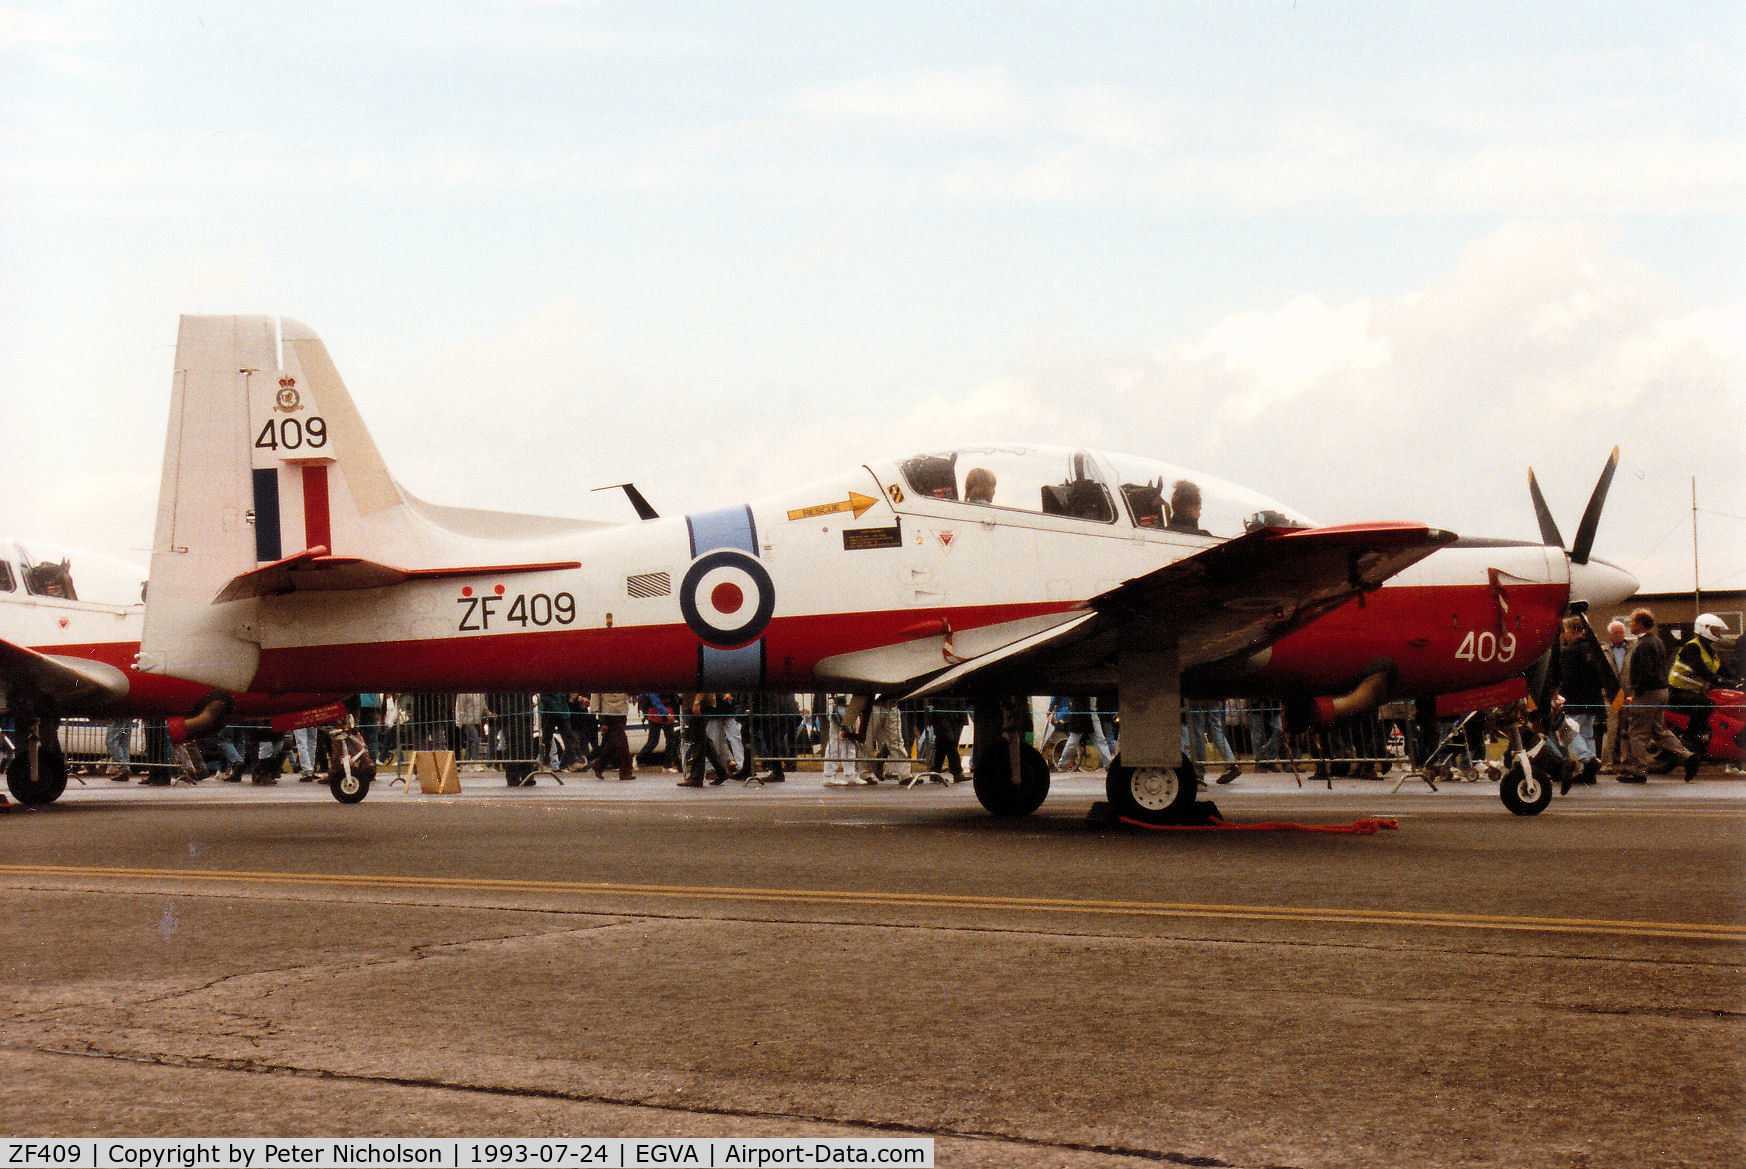 ZF409, 1992 Short S-312 Tucano T1 C/N S128/T99, Tucano T.1, callsign Cranwell 69, of 3 Flying Training School on display at the 1993 Intnl Air Tattoo at RAF Fairford.